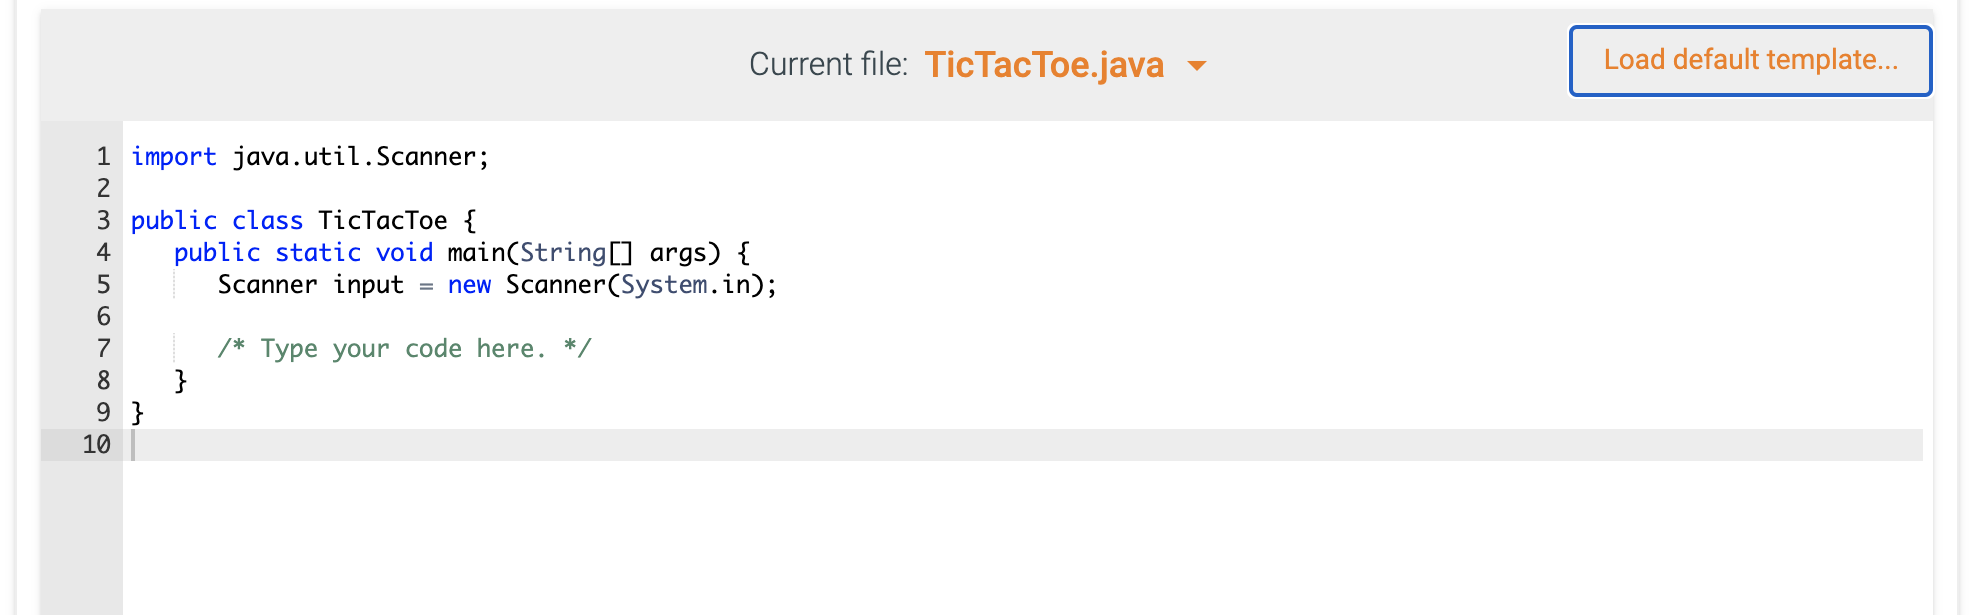 java - Identifying state of tic-tac-toe board from image - Stack Overflow